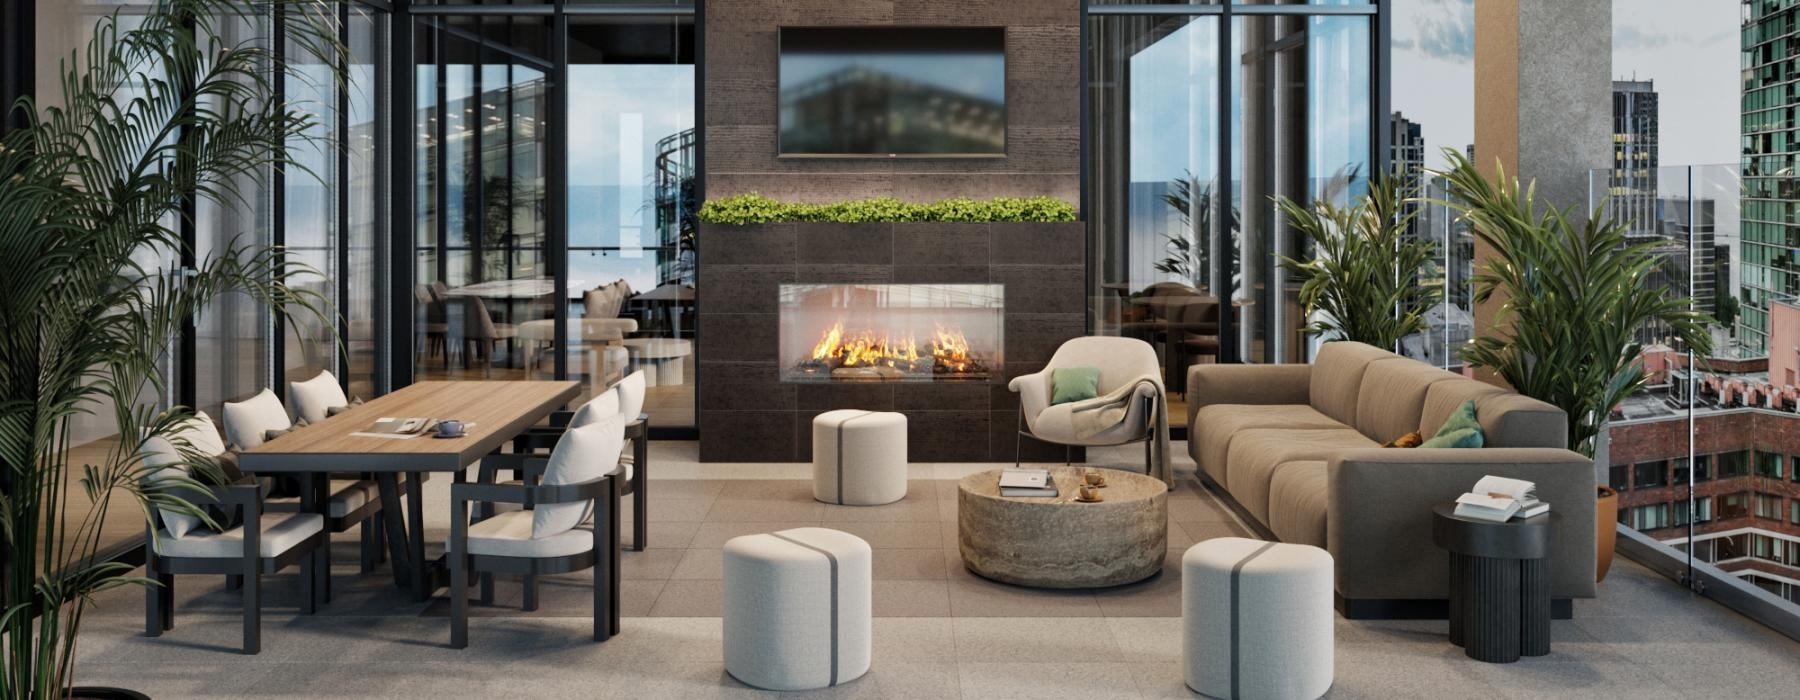 Covered balcony lounge with city views and large fireplace